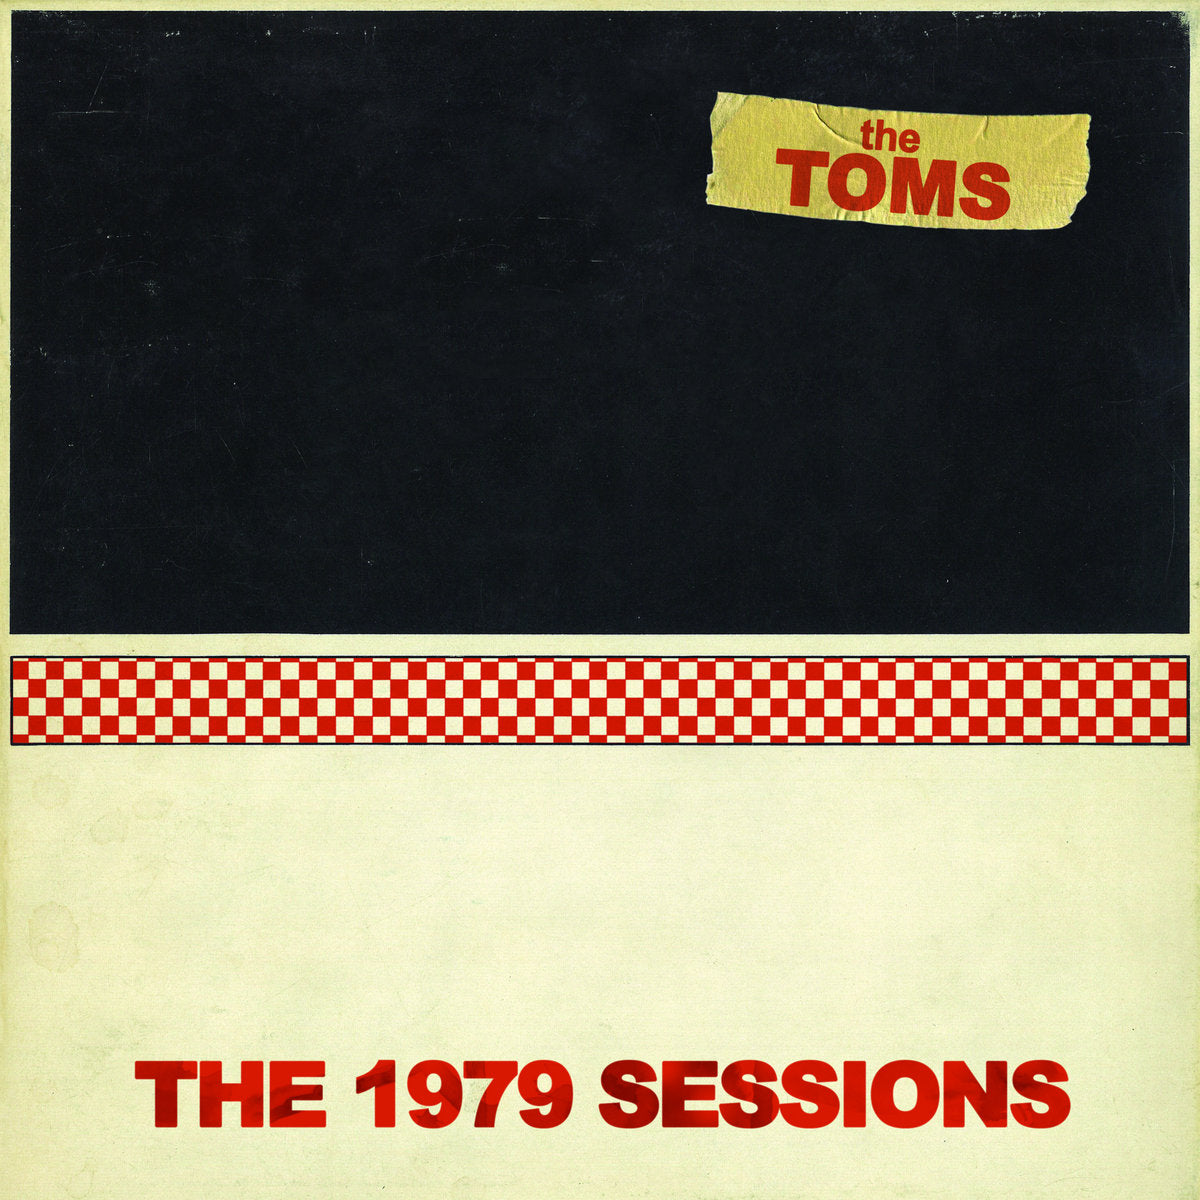 THE TOMS - "THE 1979 SESSIONS" LP *TEST PRESSING*